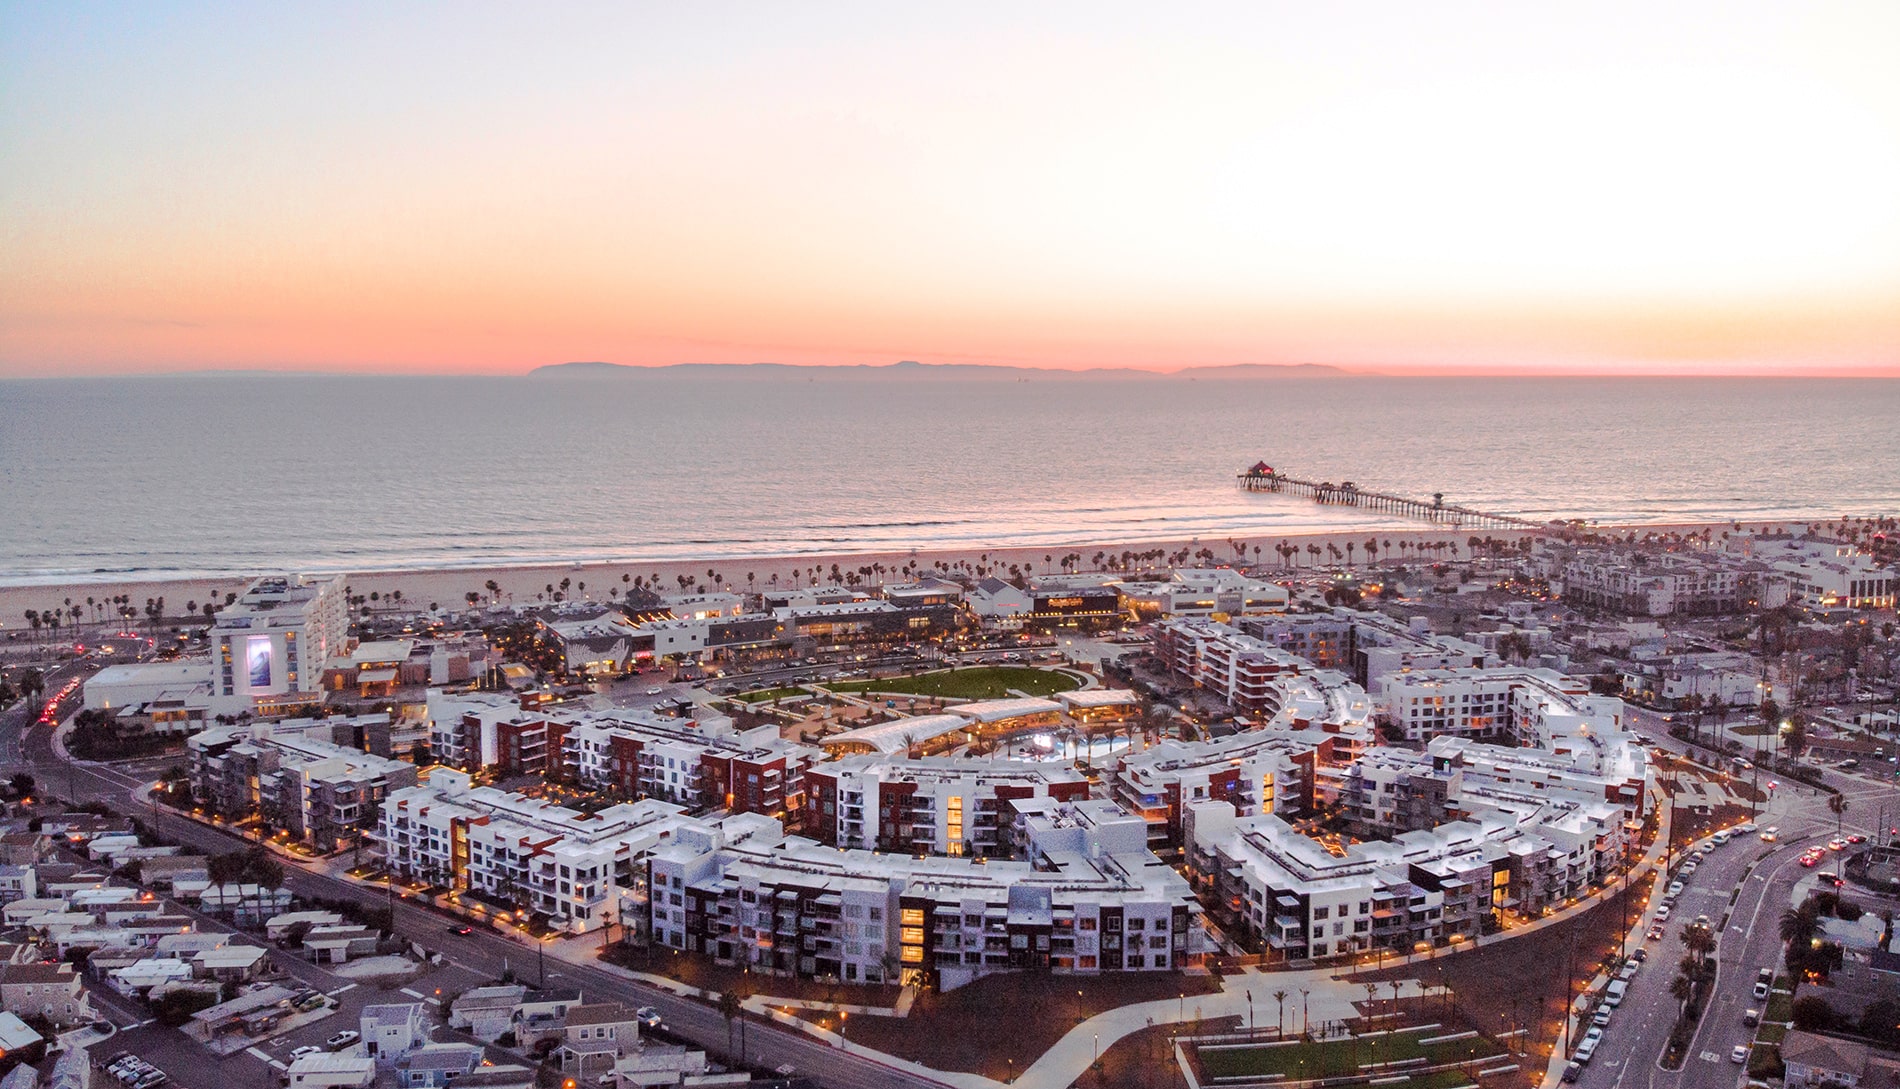 The Residences at Pacific City Apartments Aerial Image of Property, Beach, and Huntington Pier